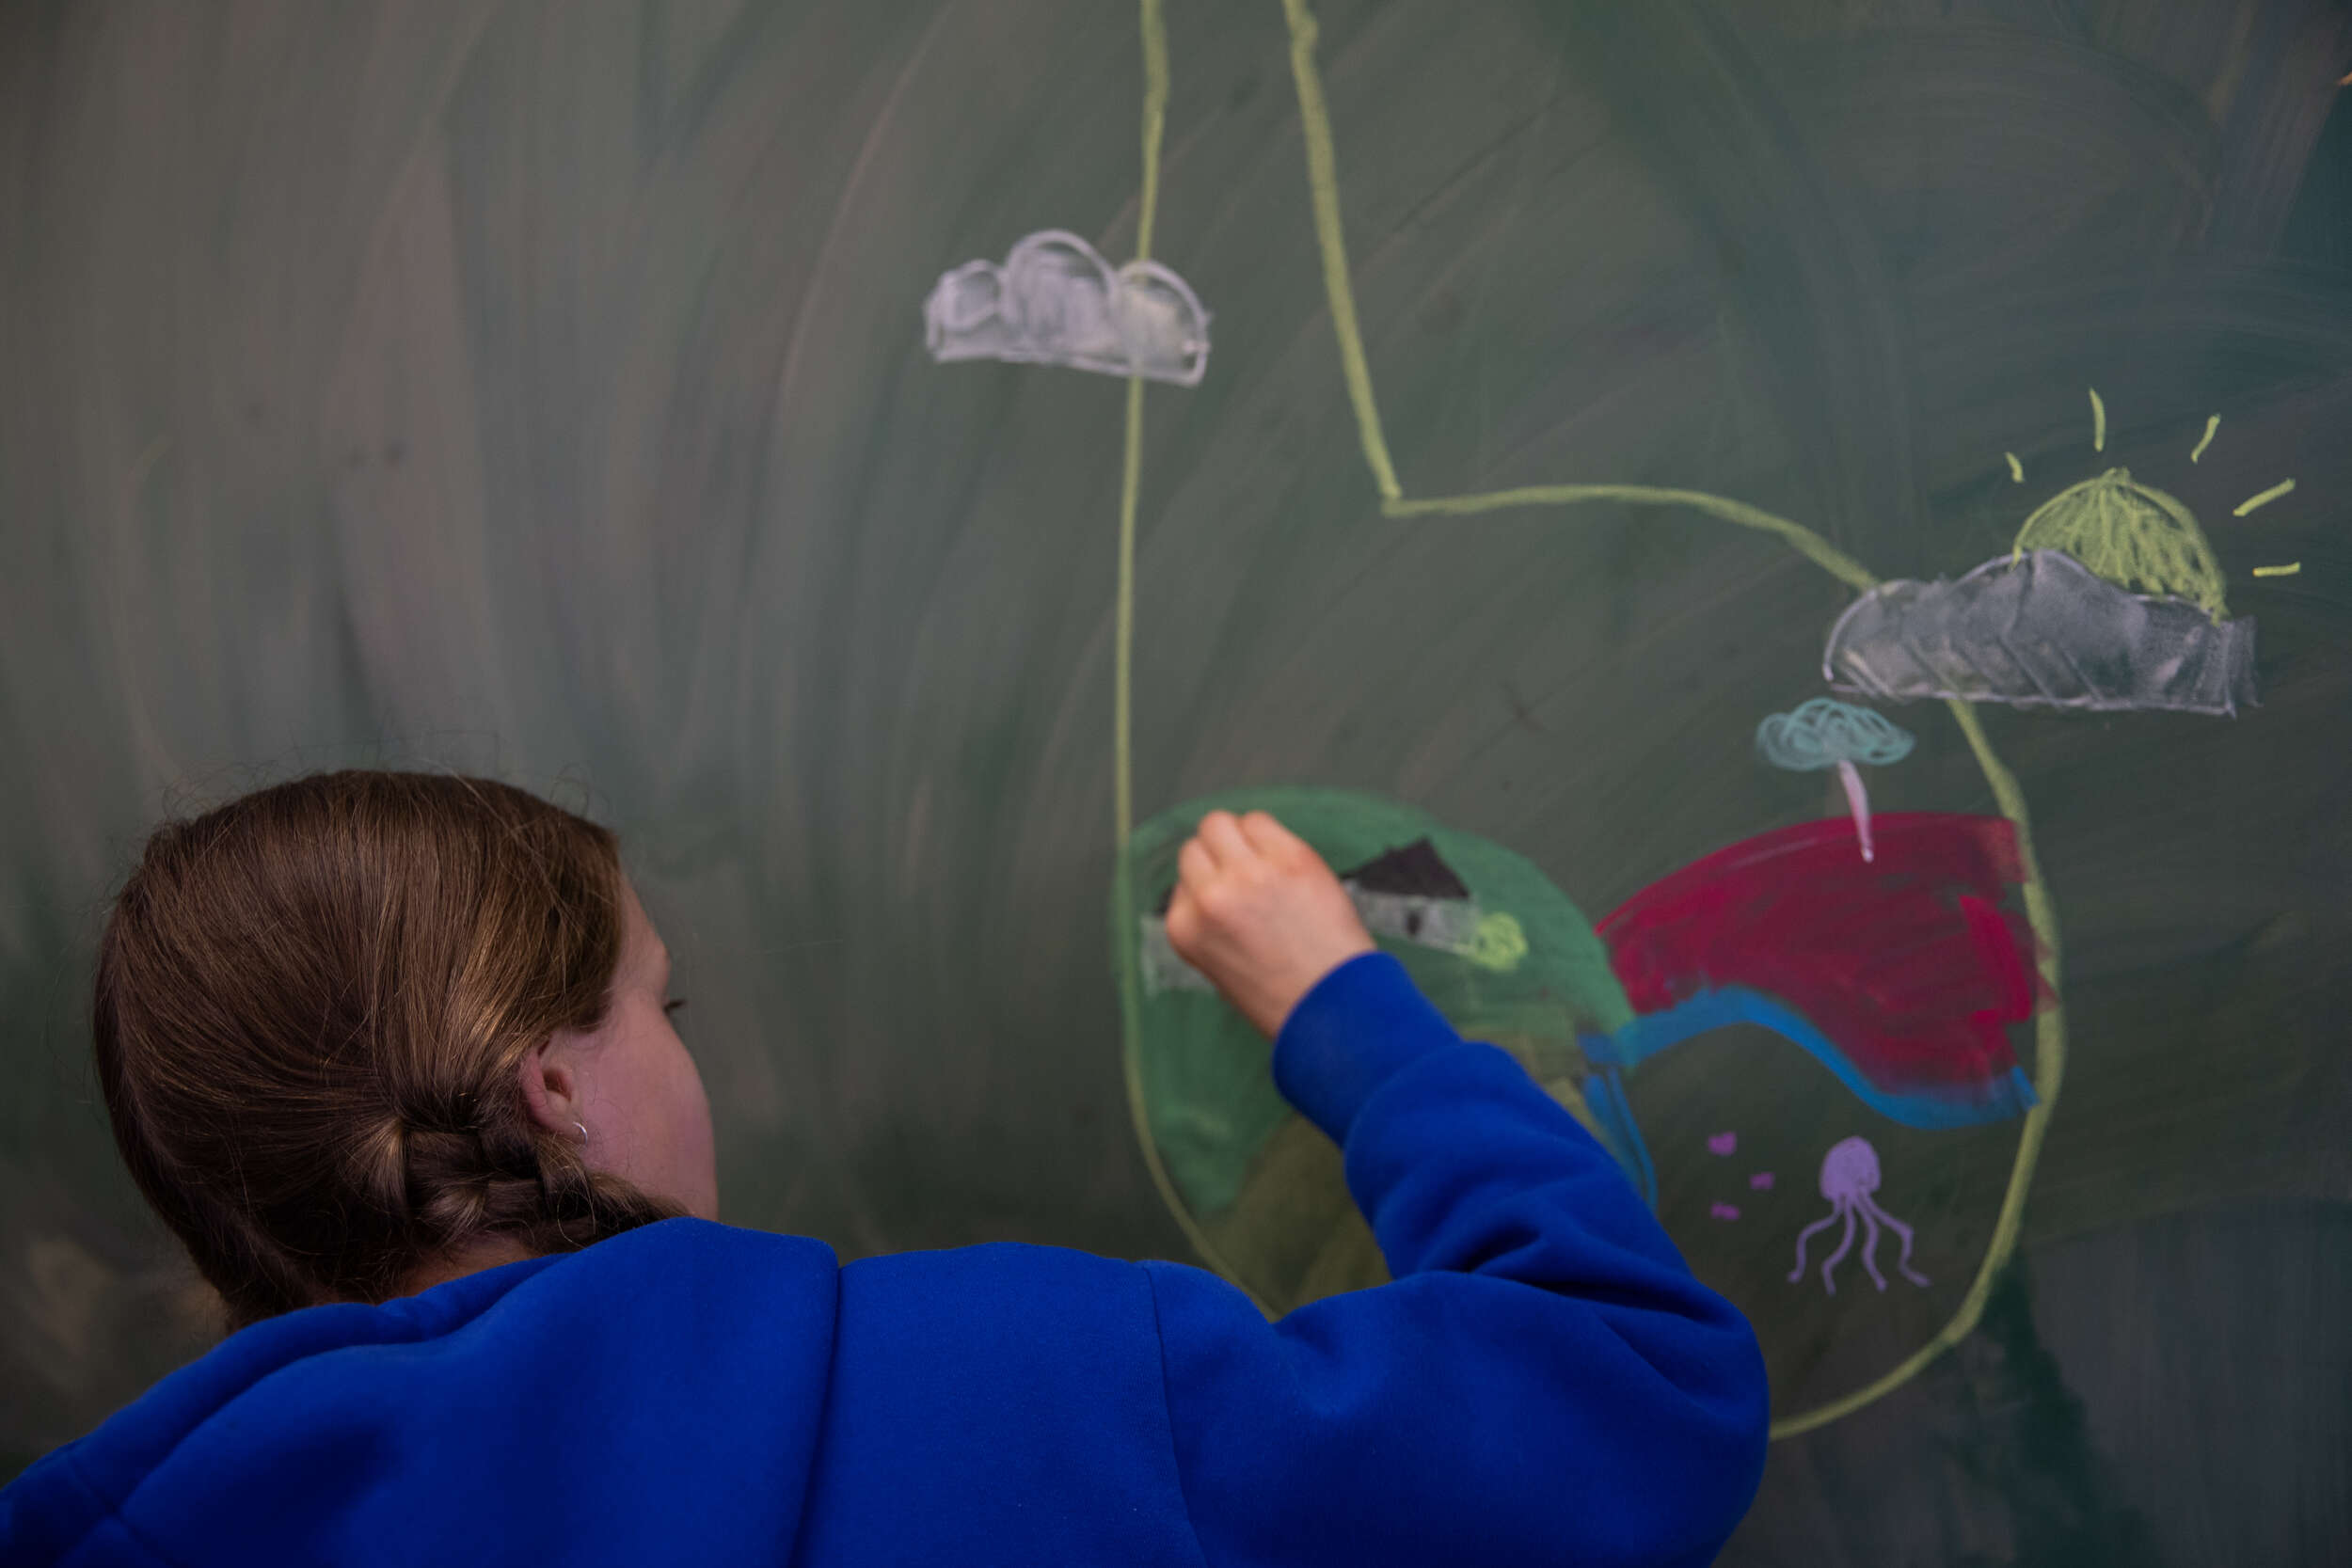 A young person drawing the Be You logo on a blackboard